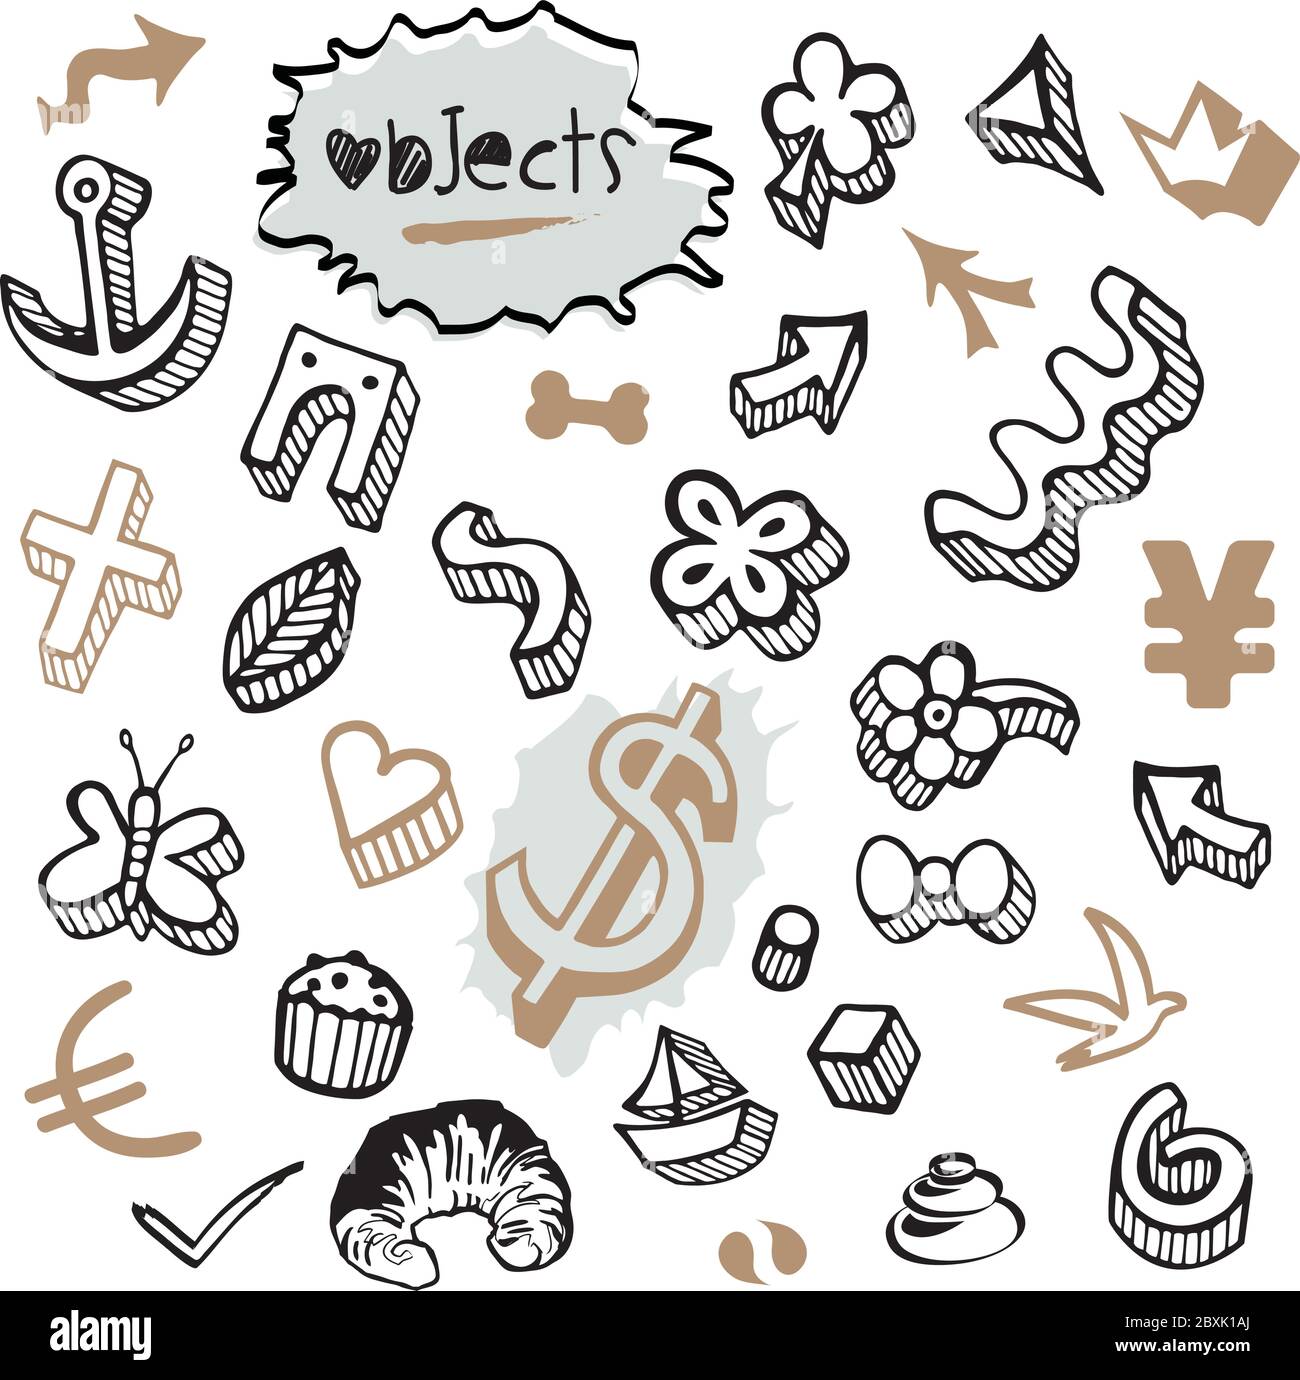 Set of Doodles - Elements and Objects Black and Brown Gold Colors Stock Vector